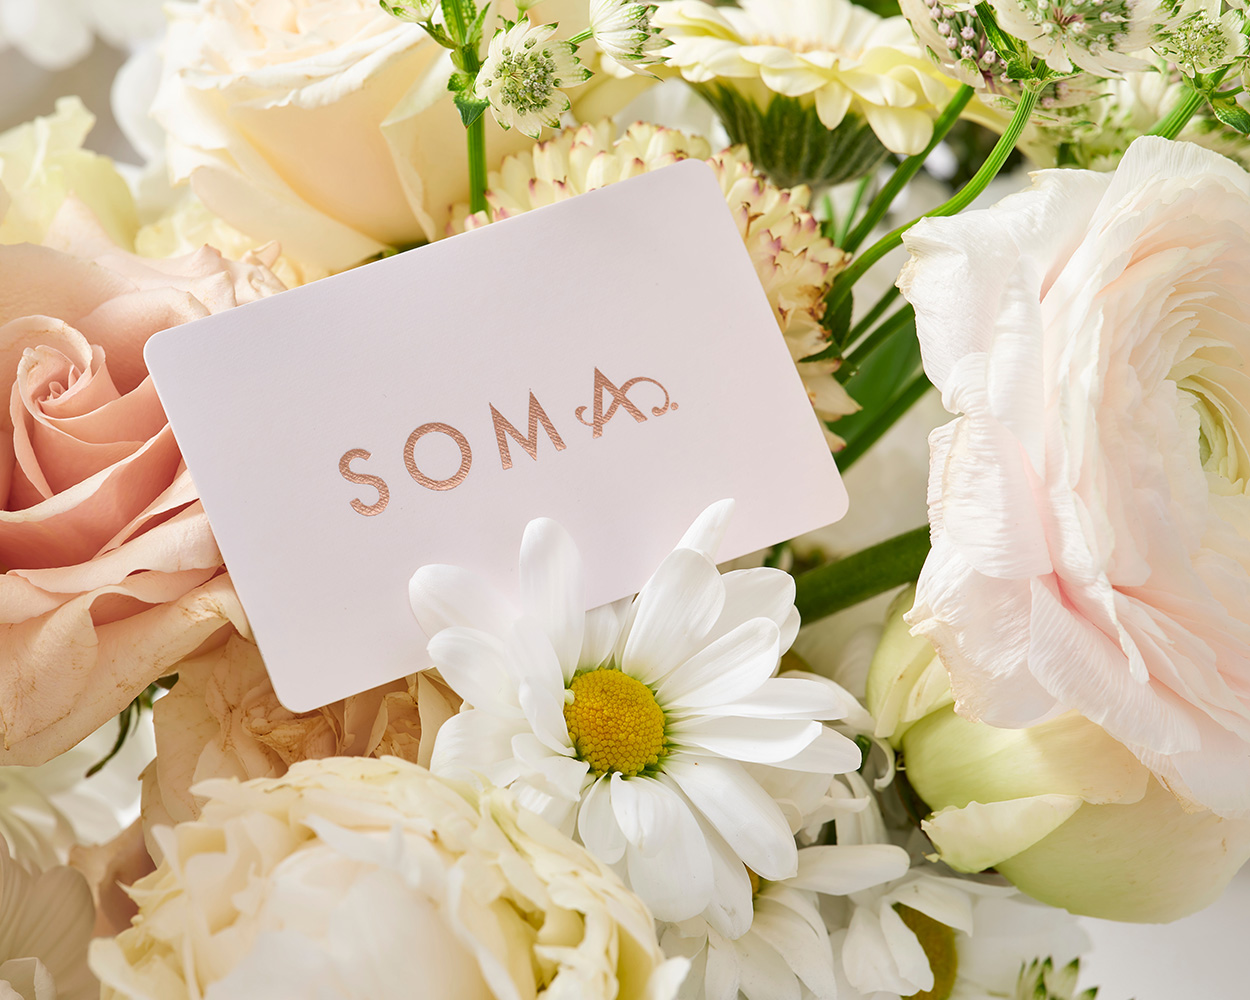 Soma<sup class=st-superscript>®</sup> gift card sitting on a white and blush floral bouquet.